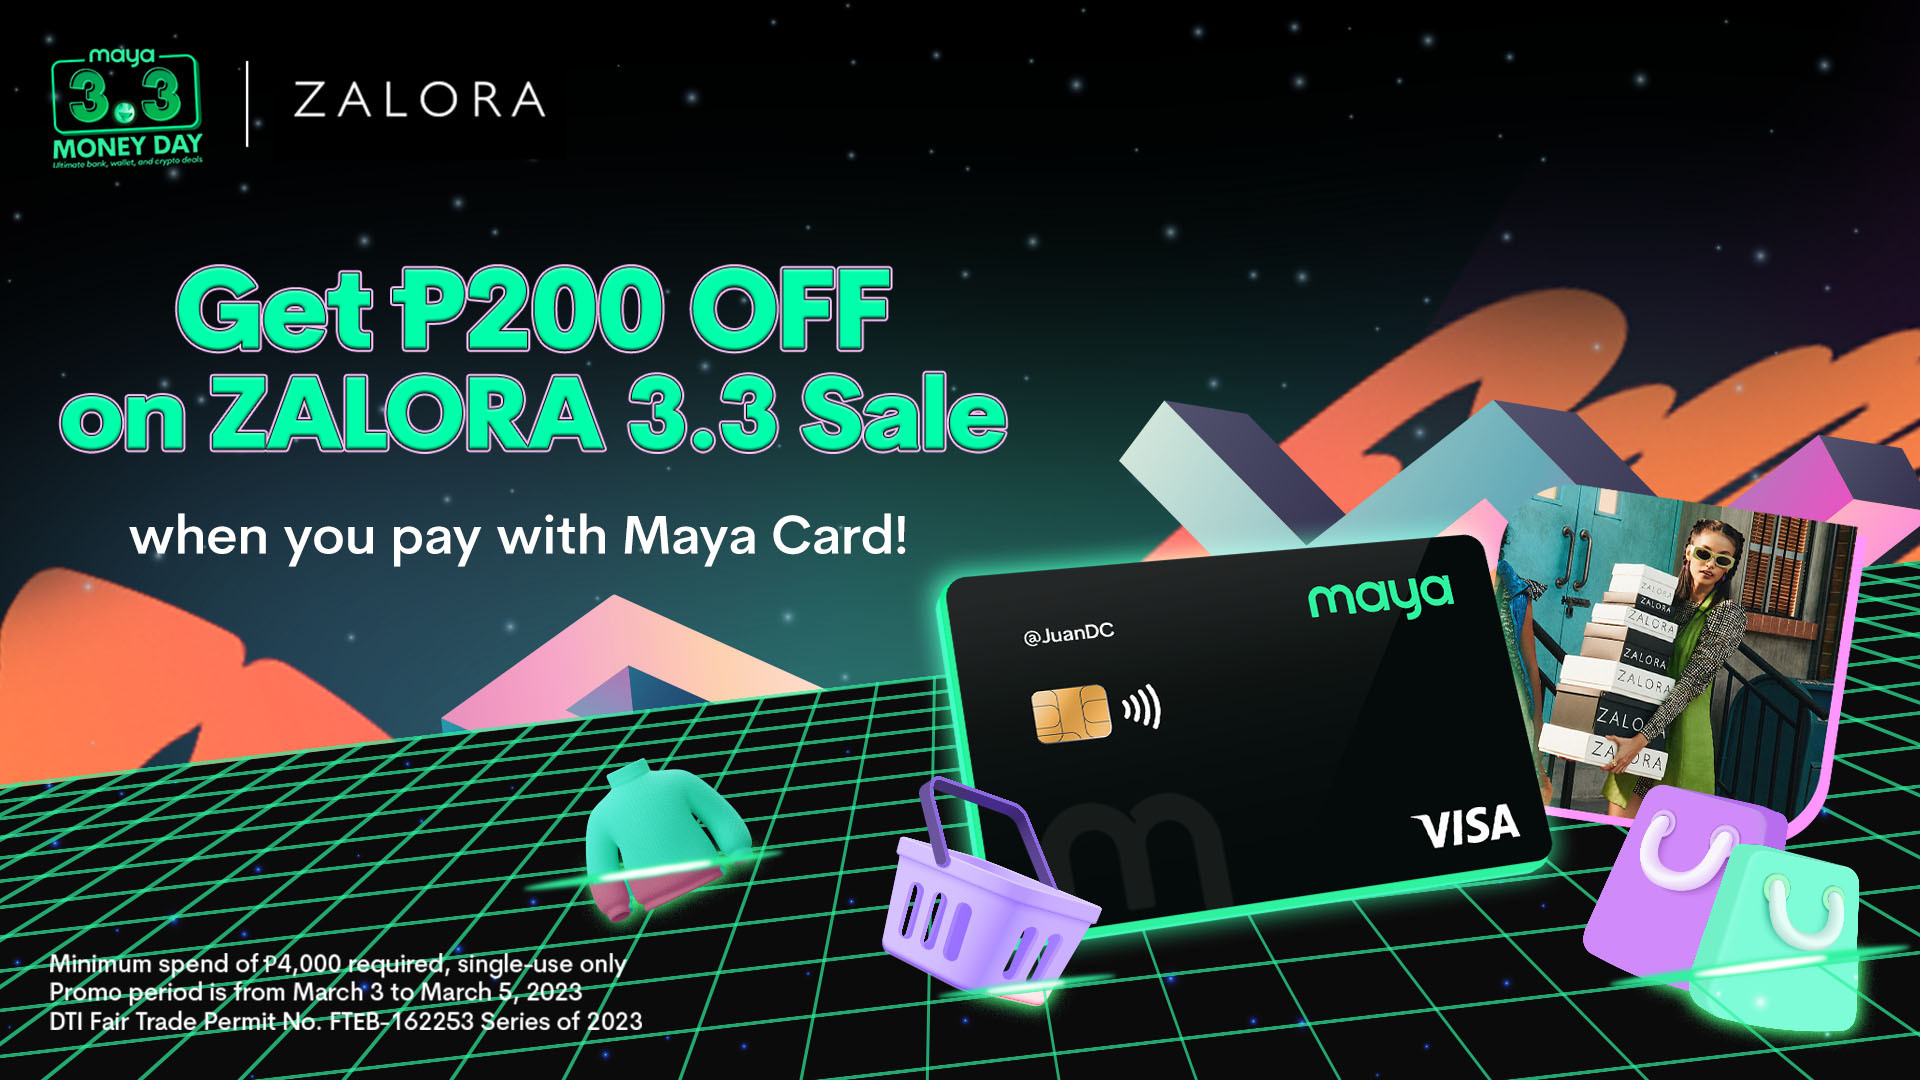 Enjoy P200 OFF on Zalora purchase with your Maya Card!